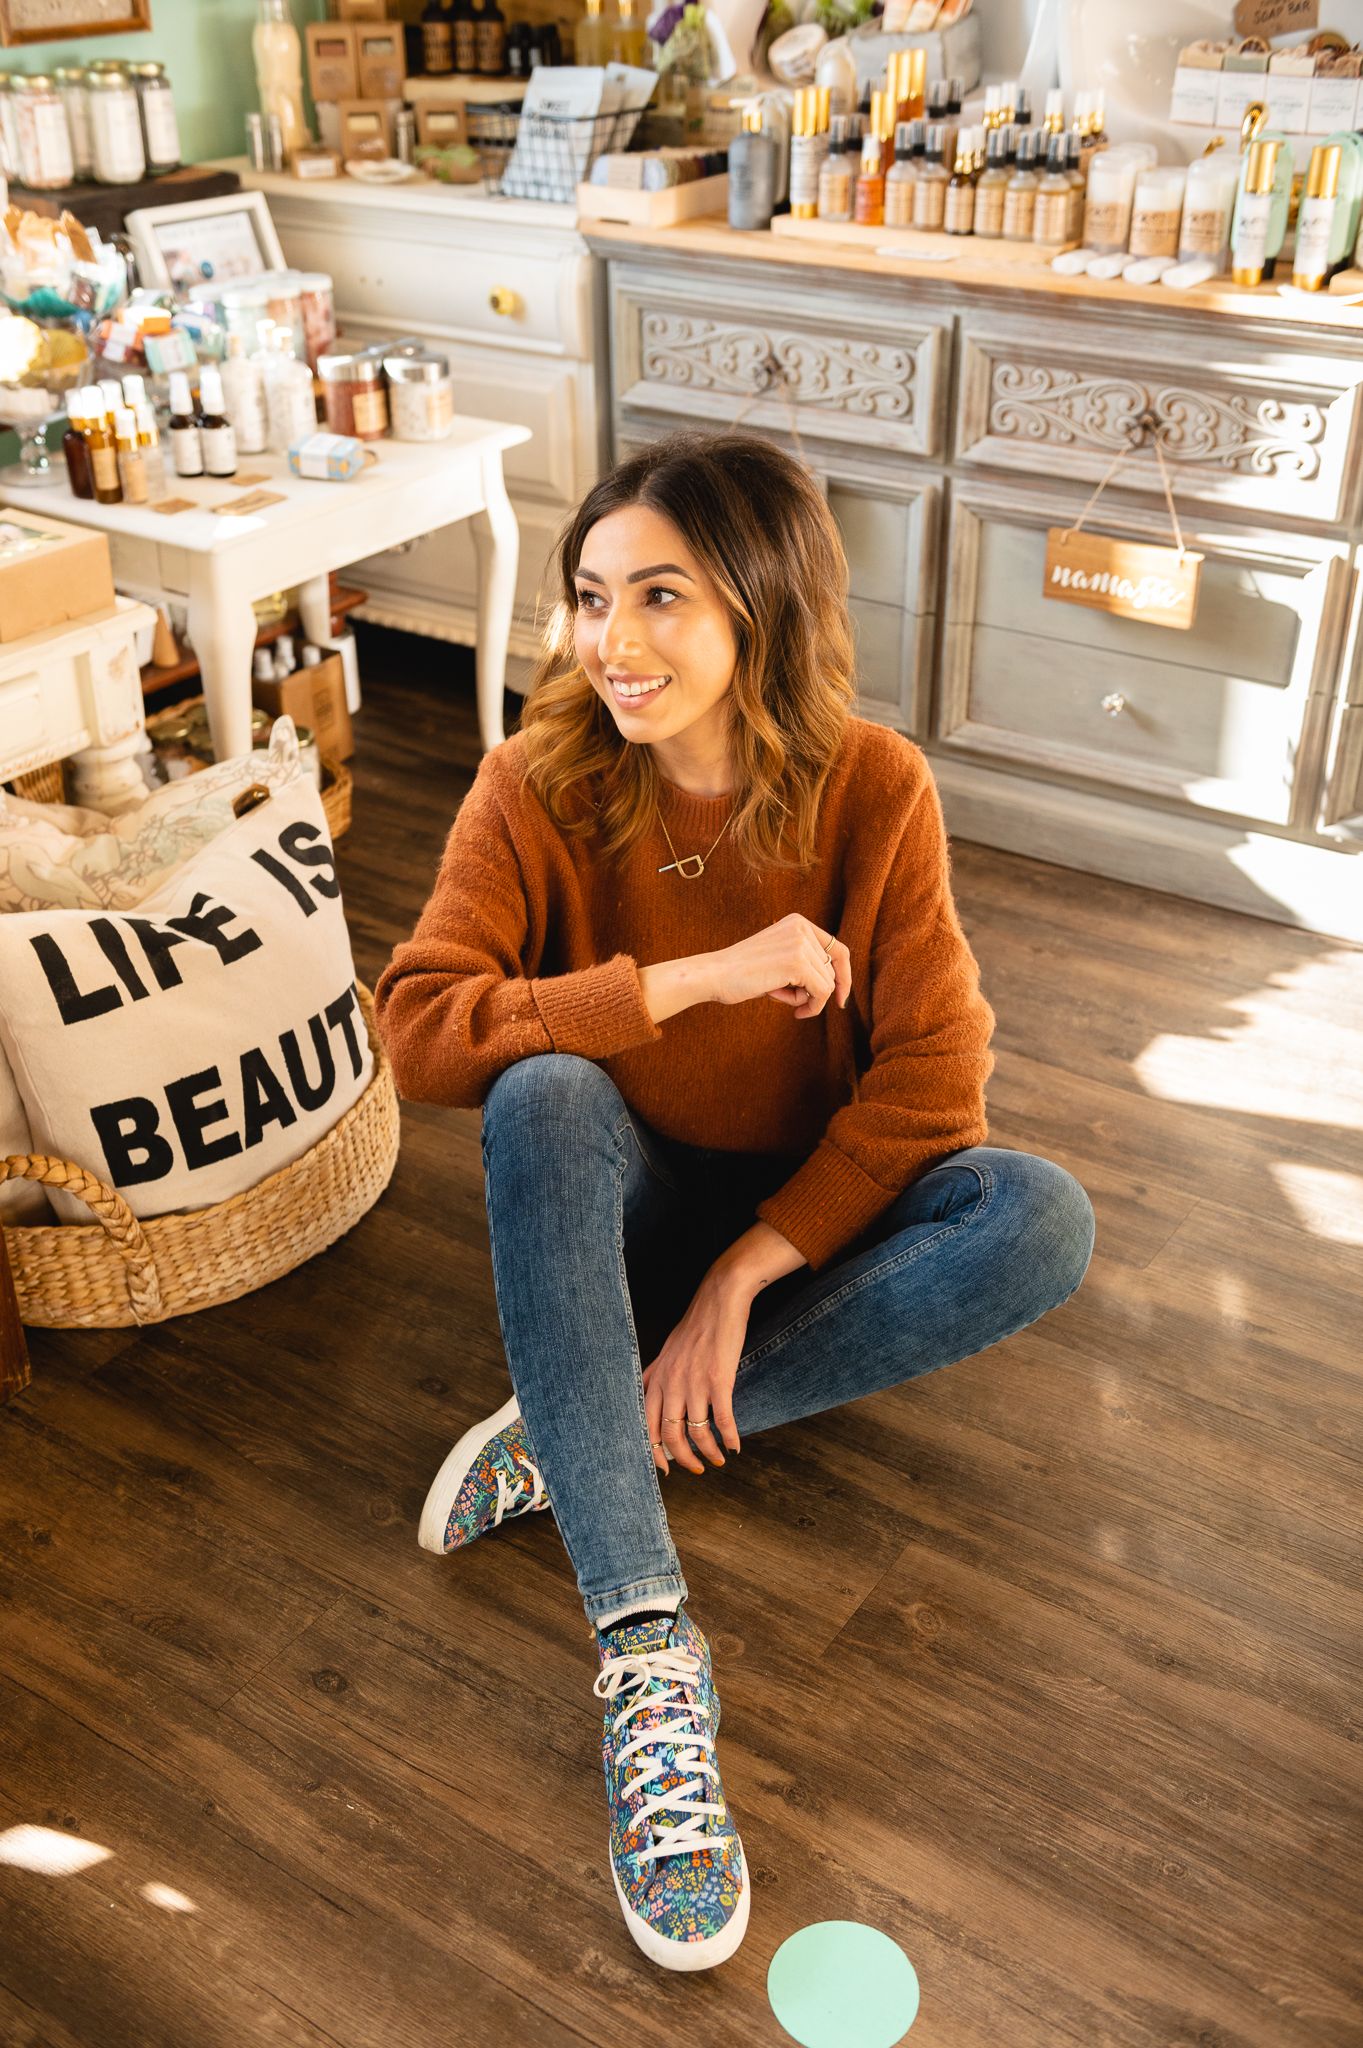 Shop owner Piya Sandhu sits in front of a display of bath-and-body products.